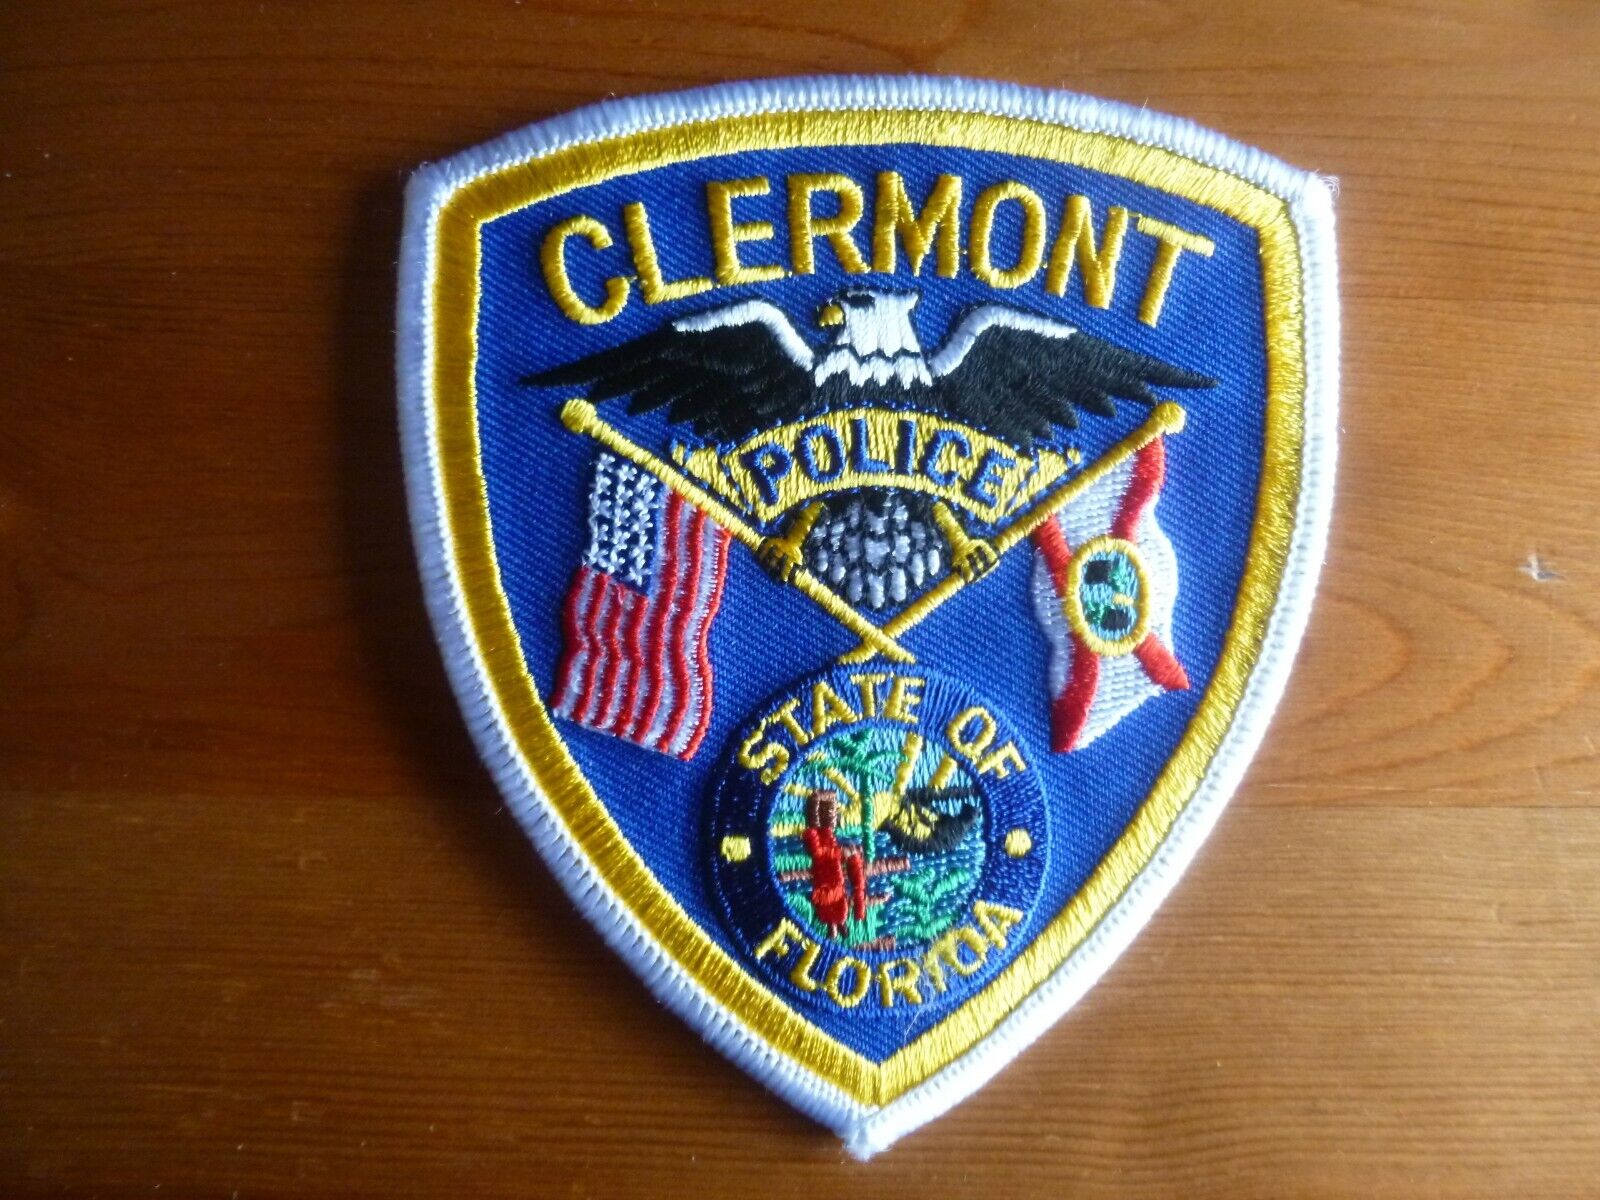 CLERMONT STATE OF FLORIDA POLICE Patch FL UNIT USA obsolete Original